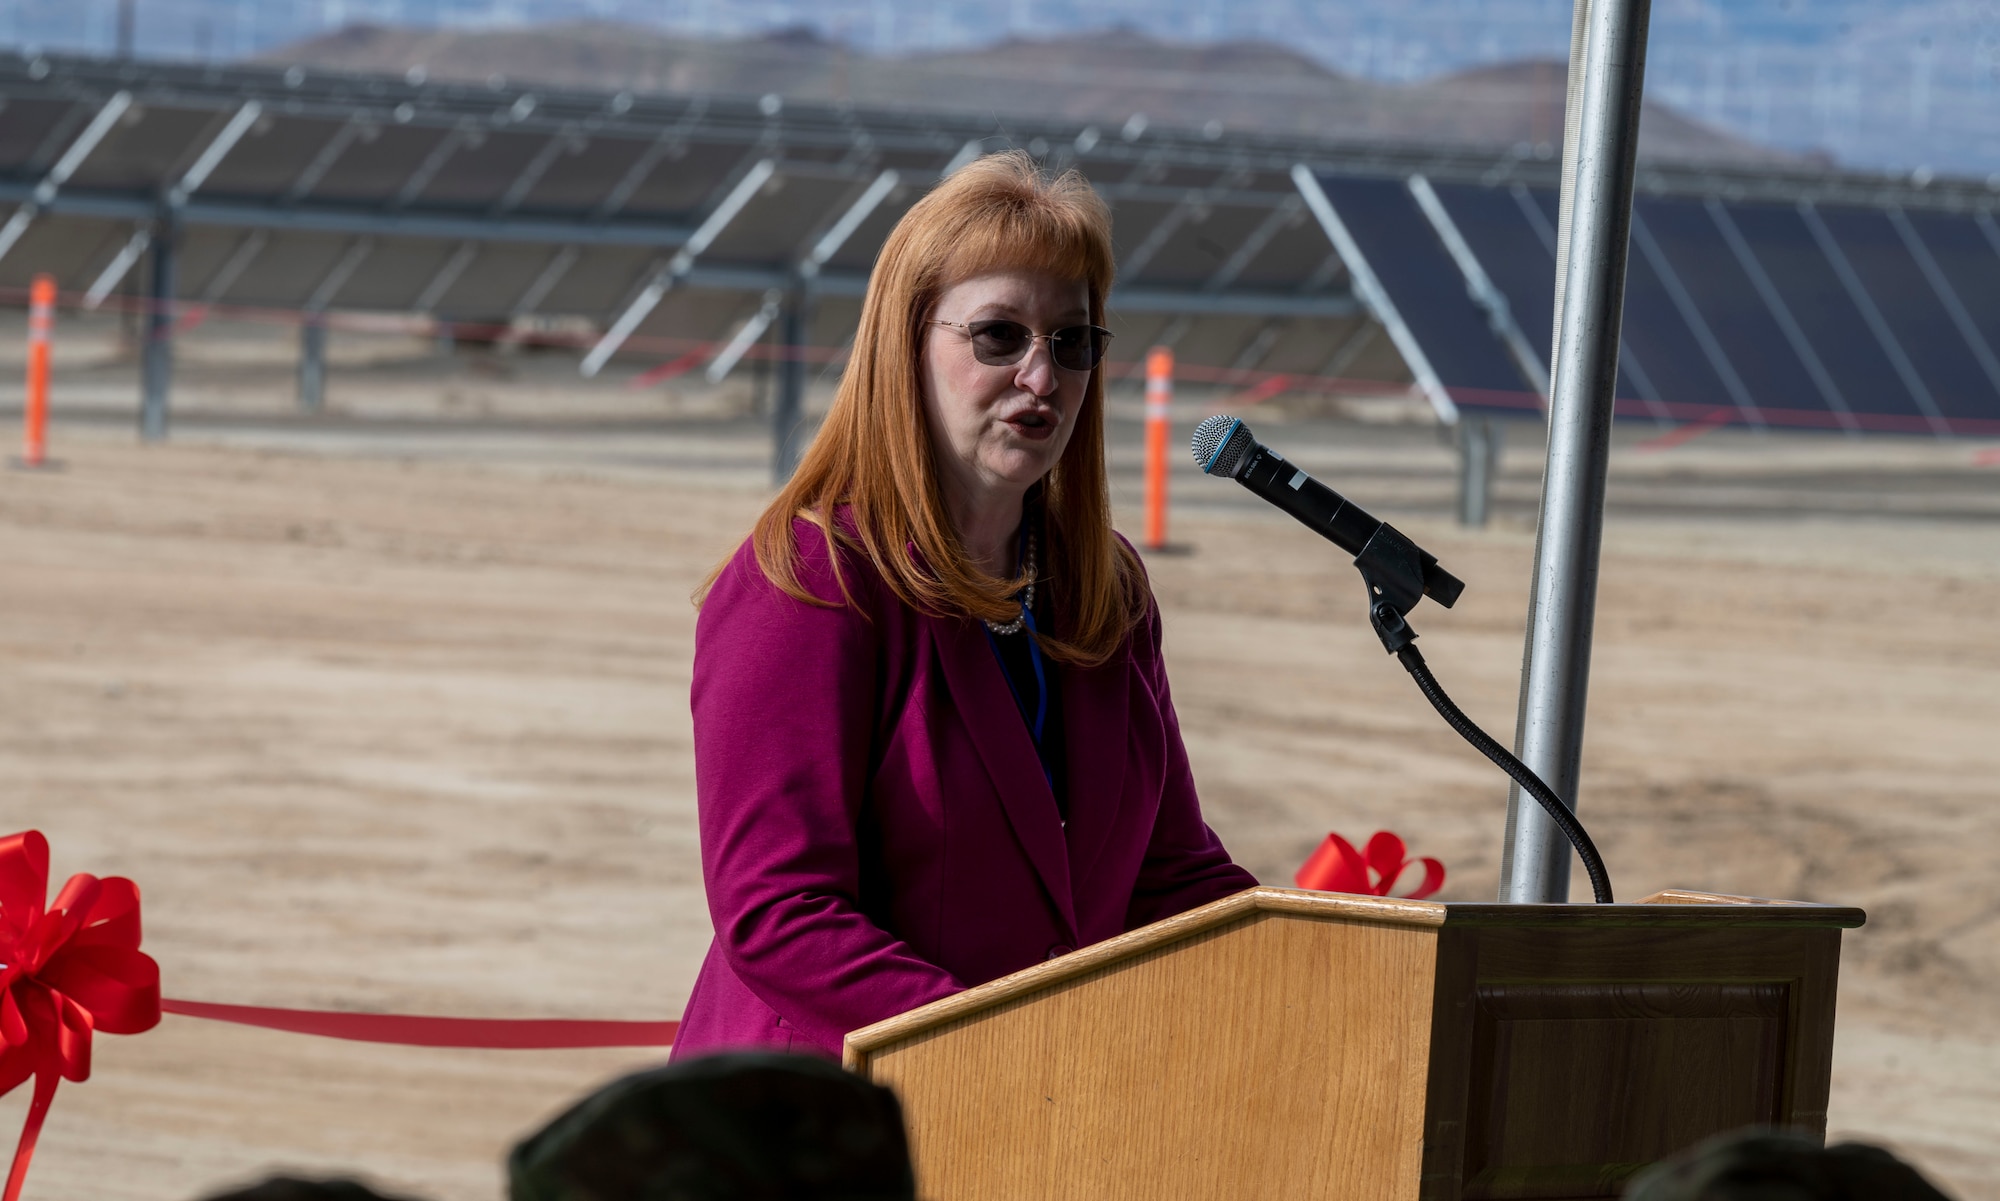 Nancy J. Balkus, Deputy Assistant Secretary of the Air Force, (Environment, Safety and Agriculture), speaks at the Edwards Solar Enhanced Use Lease Project ribbon cutting ceremony commemorating the largest private-public collaboration in Department of Defense history at Edwards Air Force Base, California, Feb. 2.